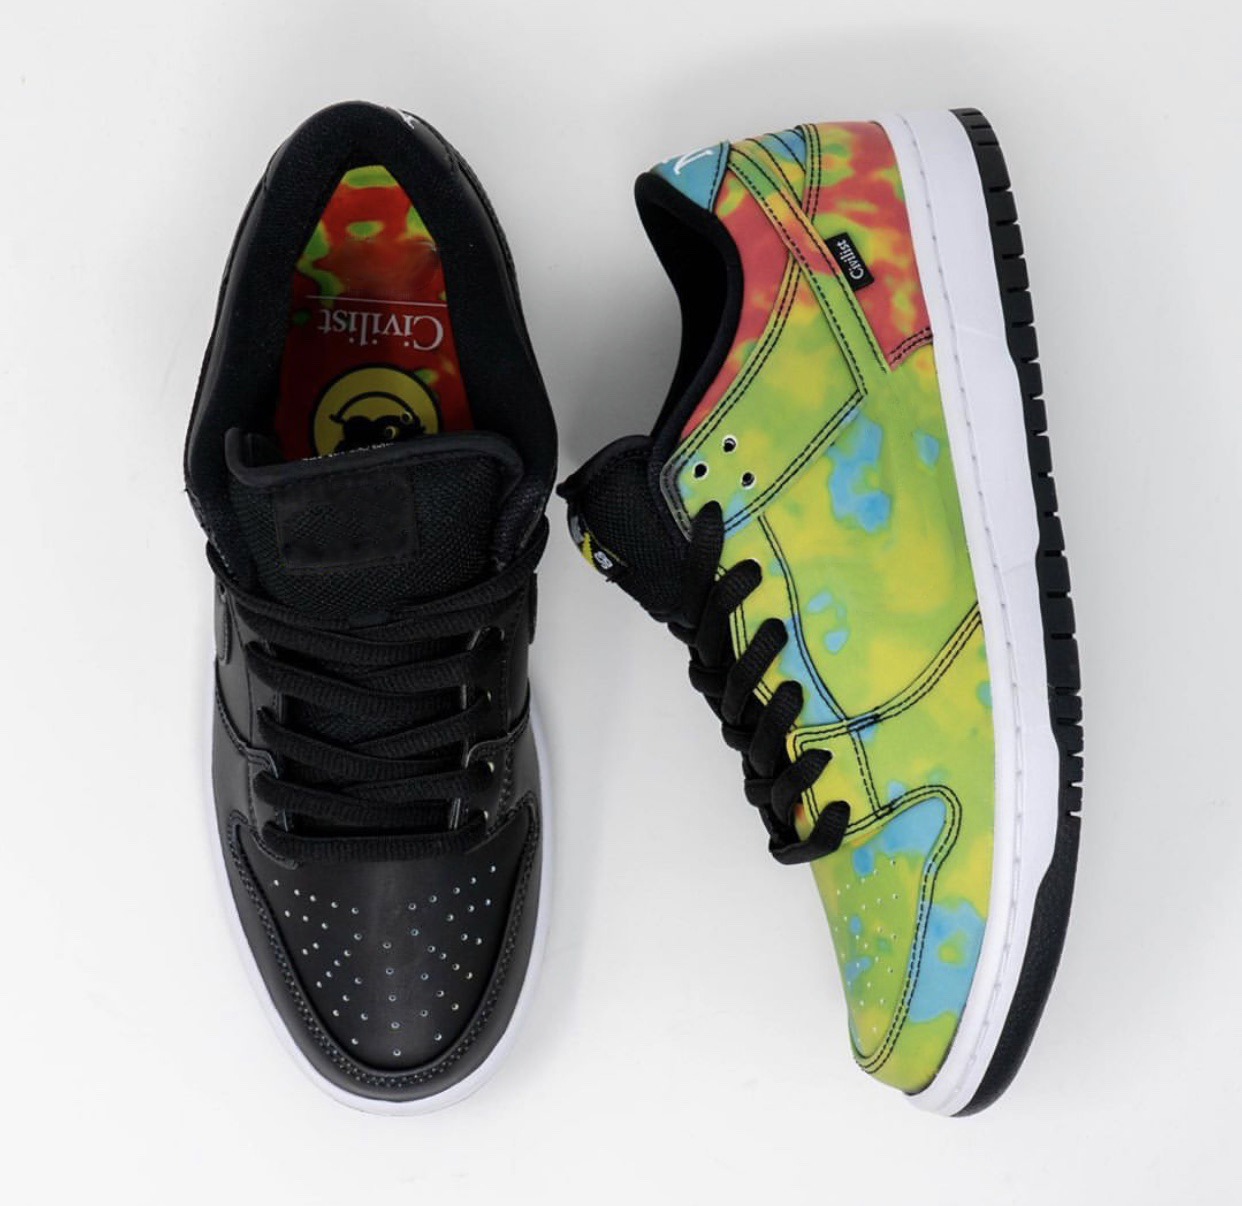 

New Authentic dunks Civilist Shoes Features Black heat-activated upper with hidden Men Women Sports Sneakers With Original box CZ5123-001 Size US4-13